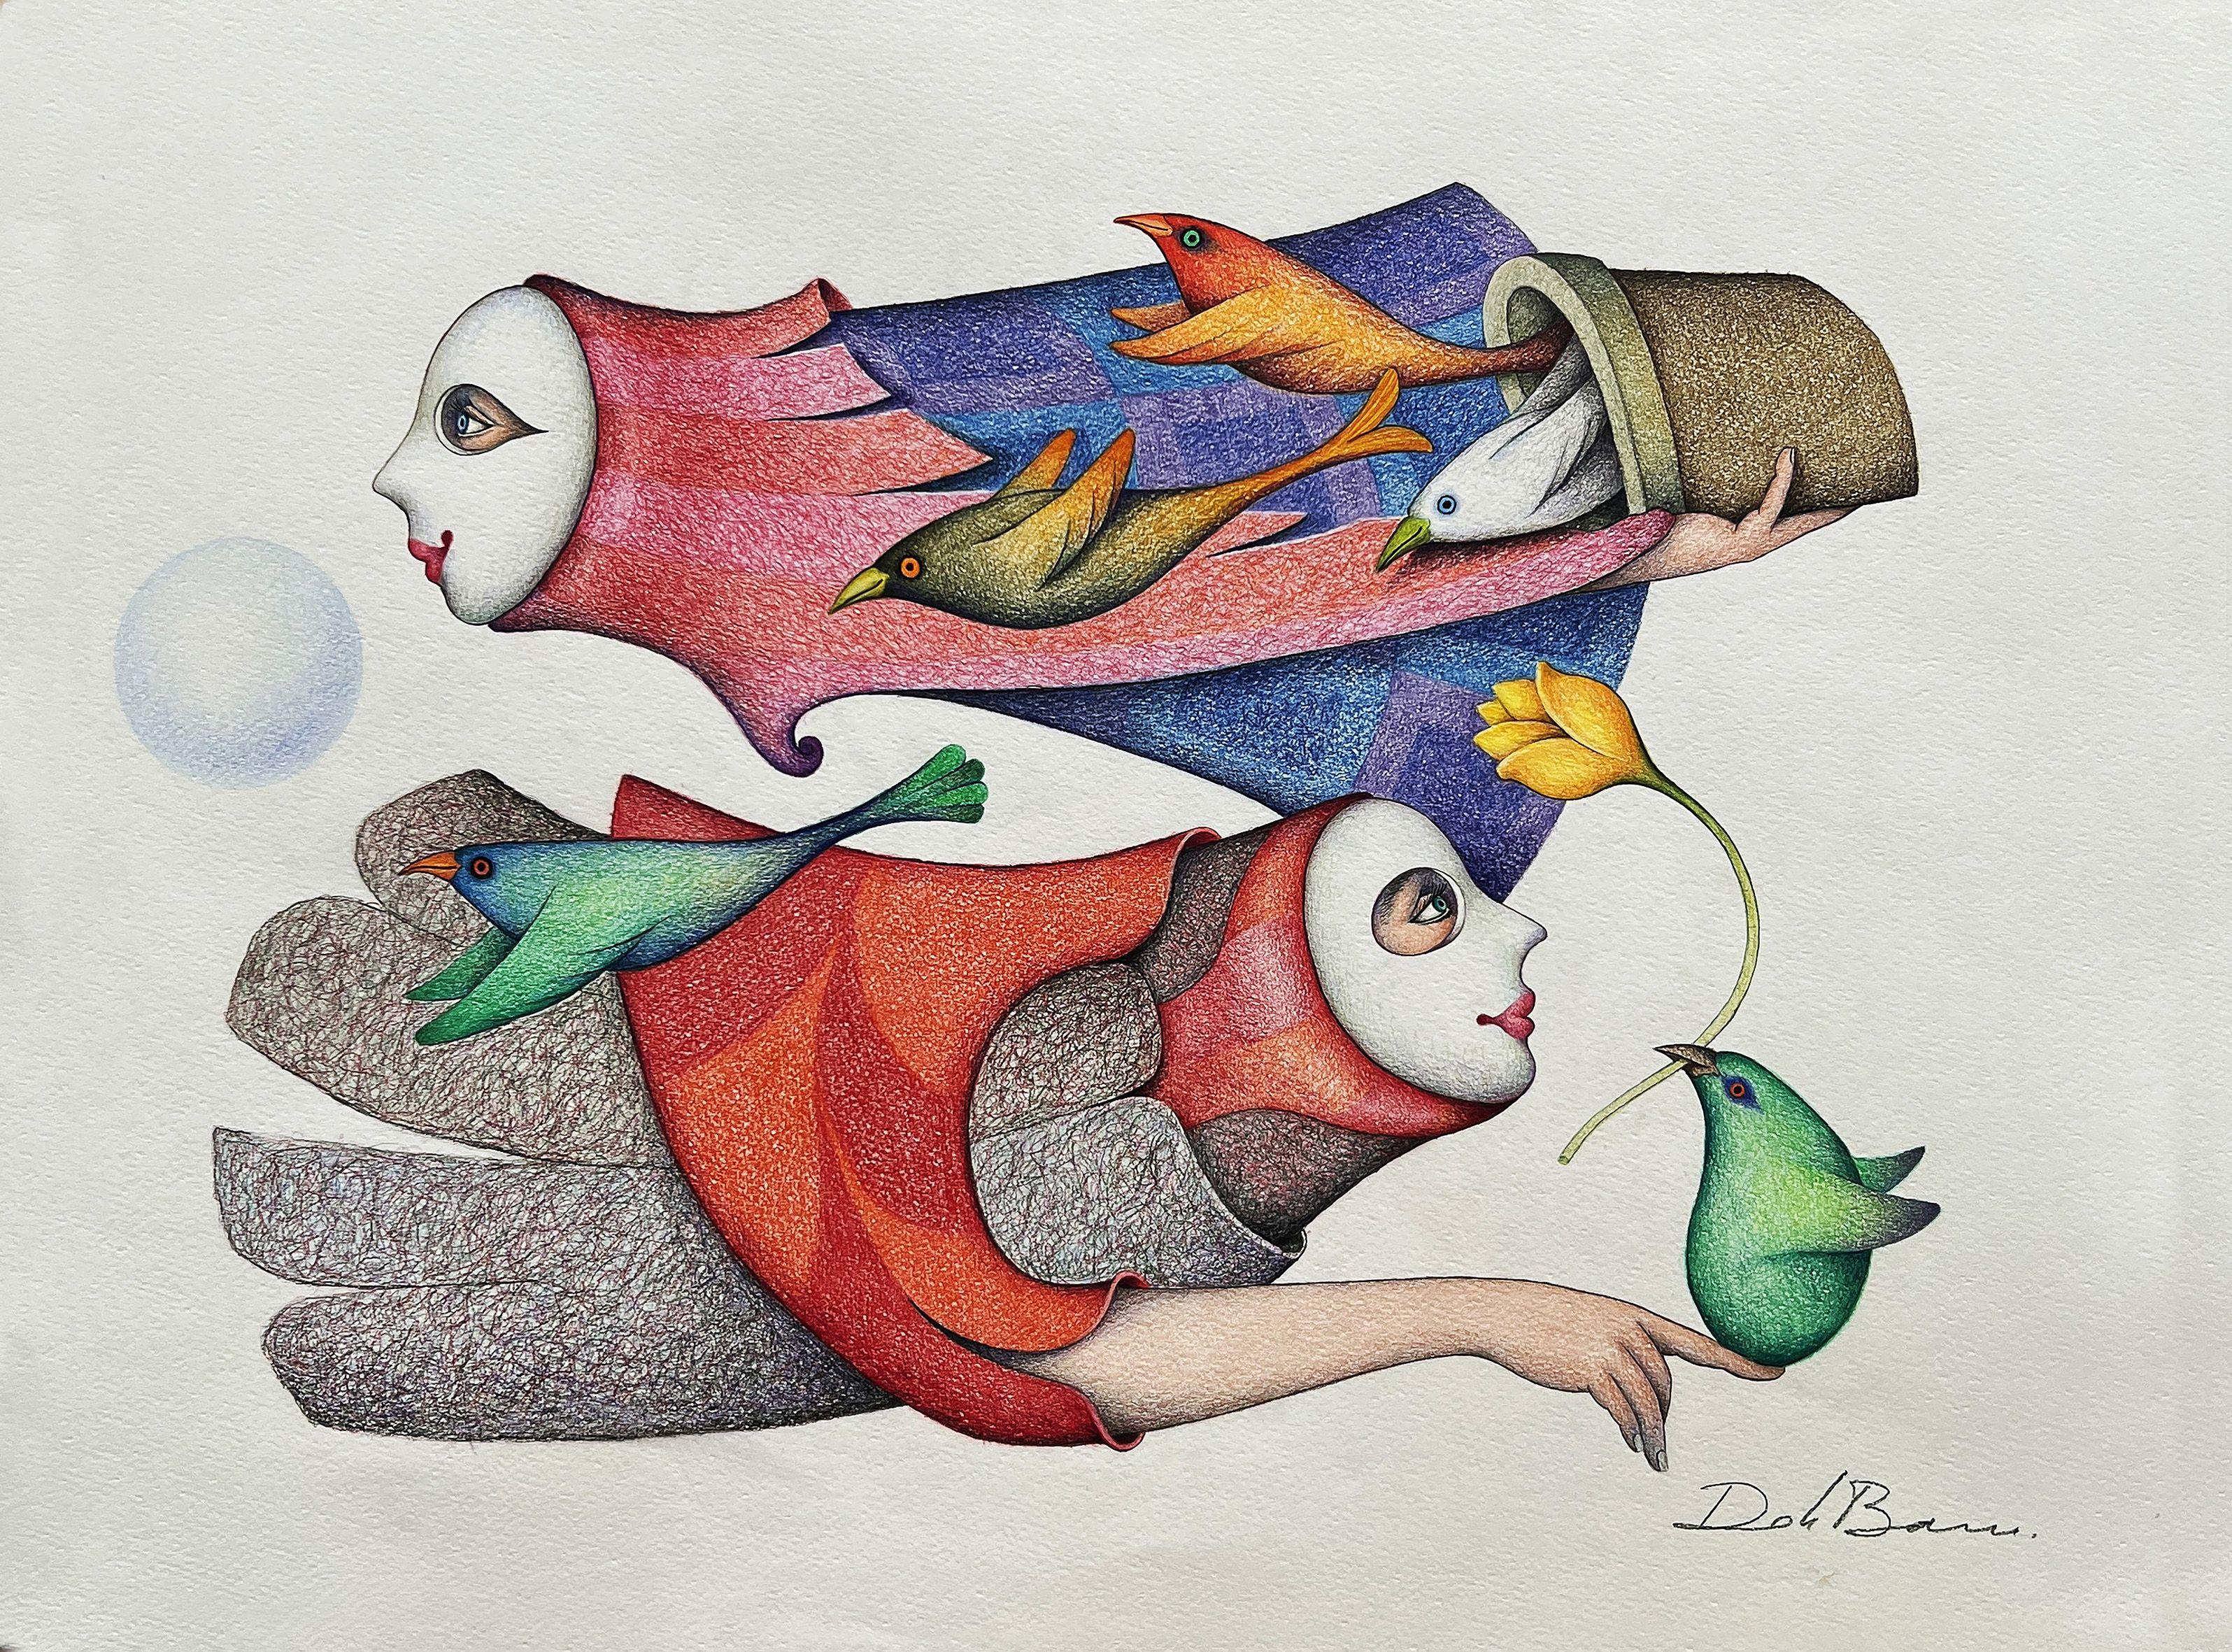 From the series flyers, Drawing, Pencil/Colored Pencil on Watercolor Paper - Art by Jose Luis De la Barra Bellido